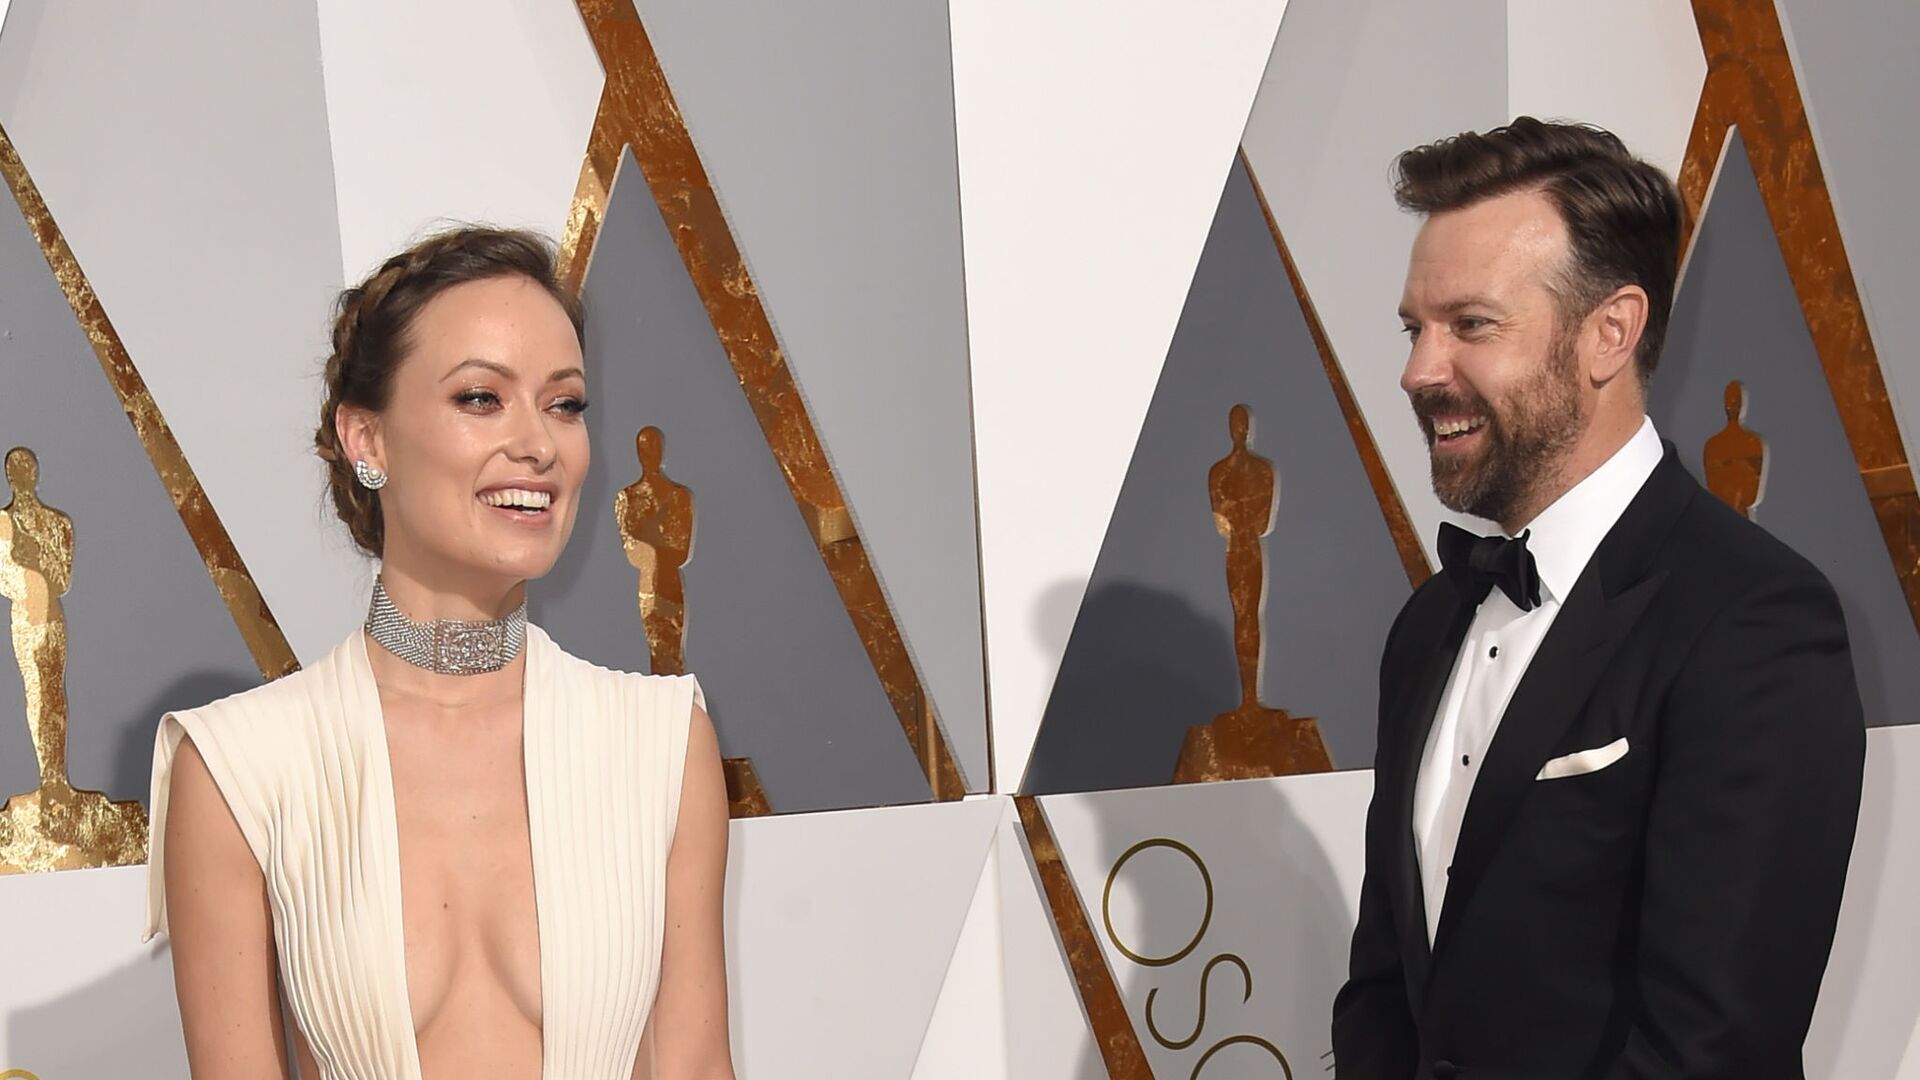 Olivia Wilde, left, and Jason Sudeikis arrive at the Oscars on Sunday, Feb. 28, 2016, at the Dolby Theatre in Los Angeles - Sputnik International, 1920, 28.04.2022